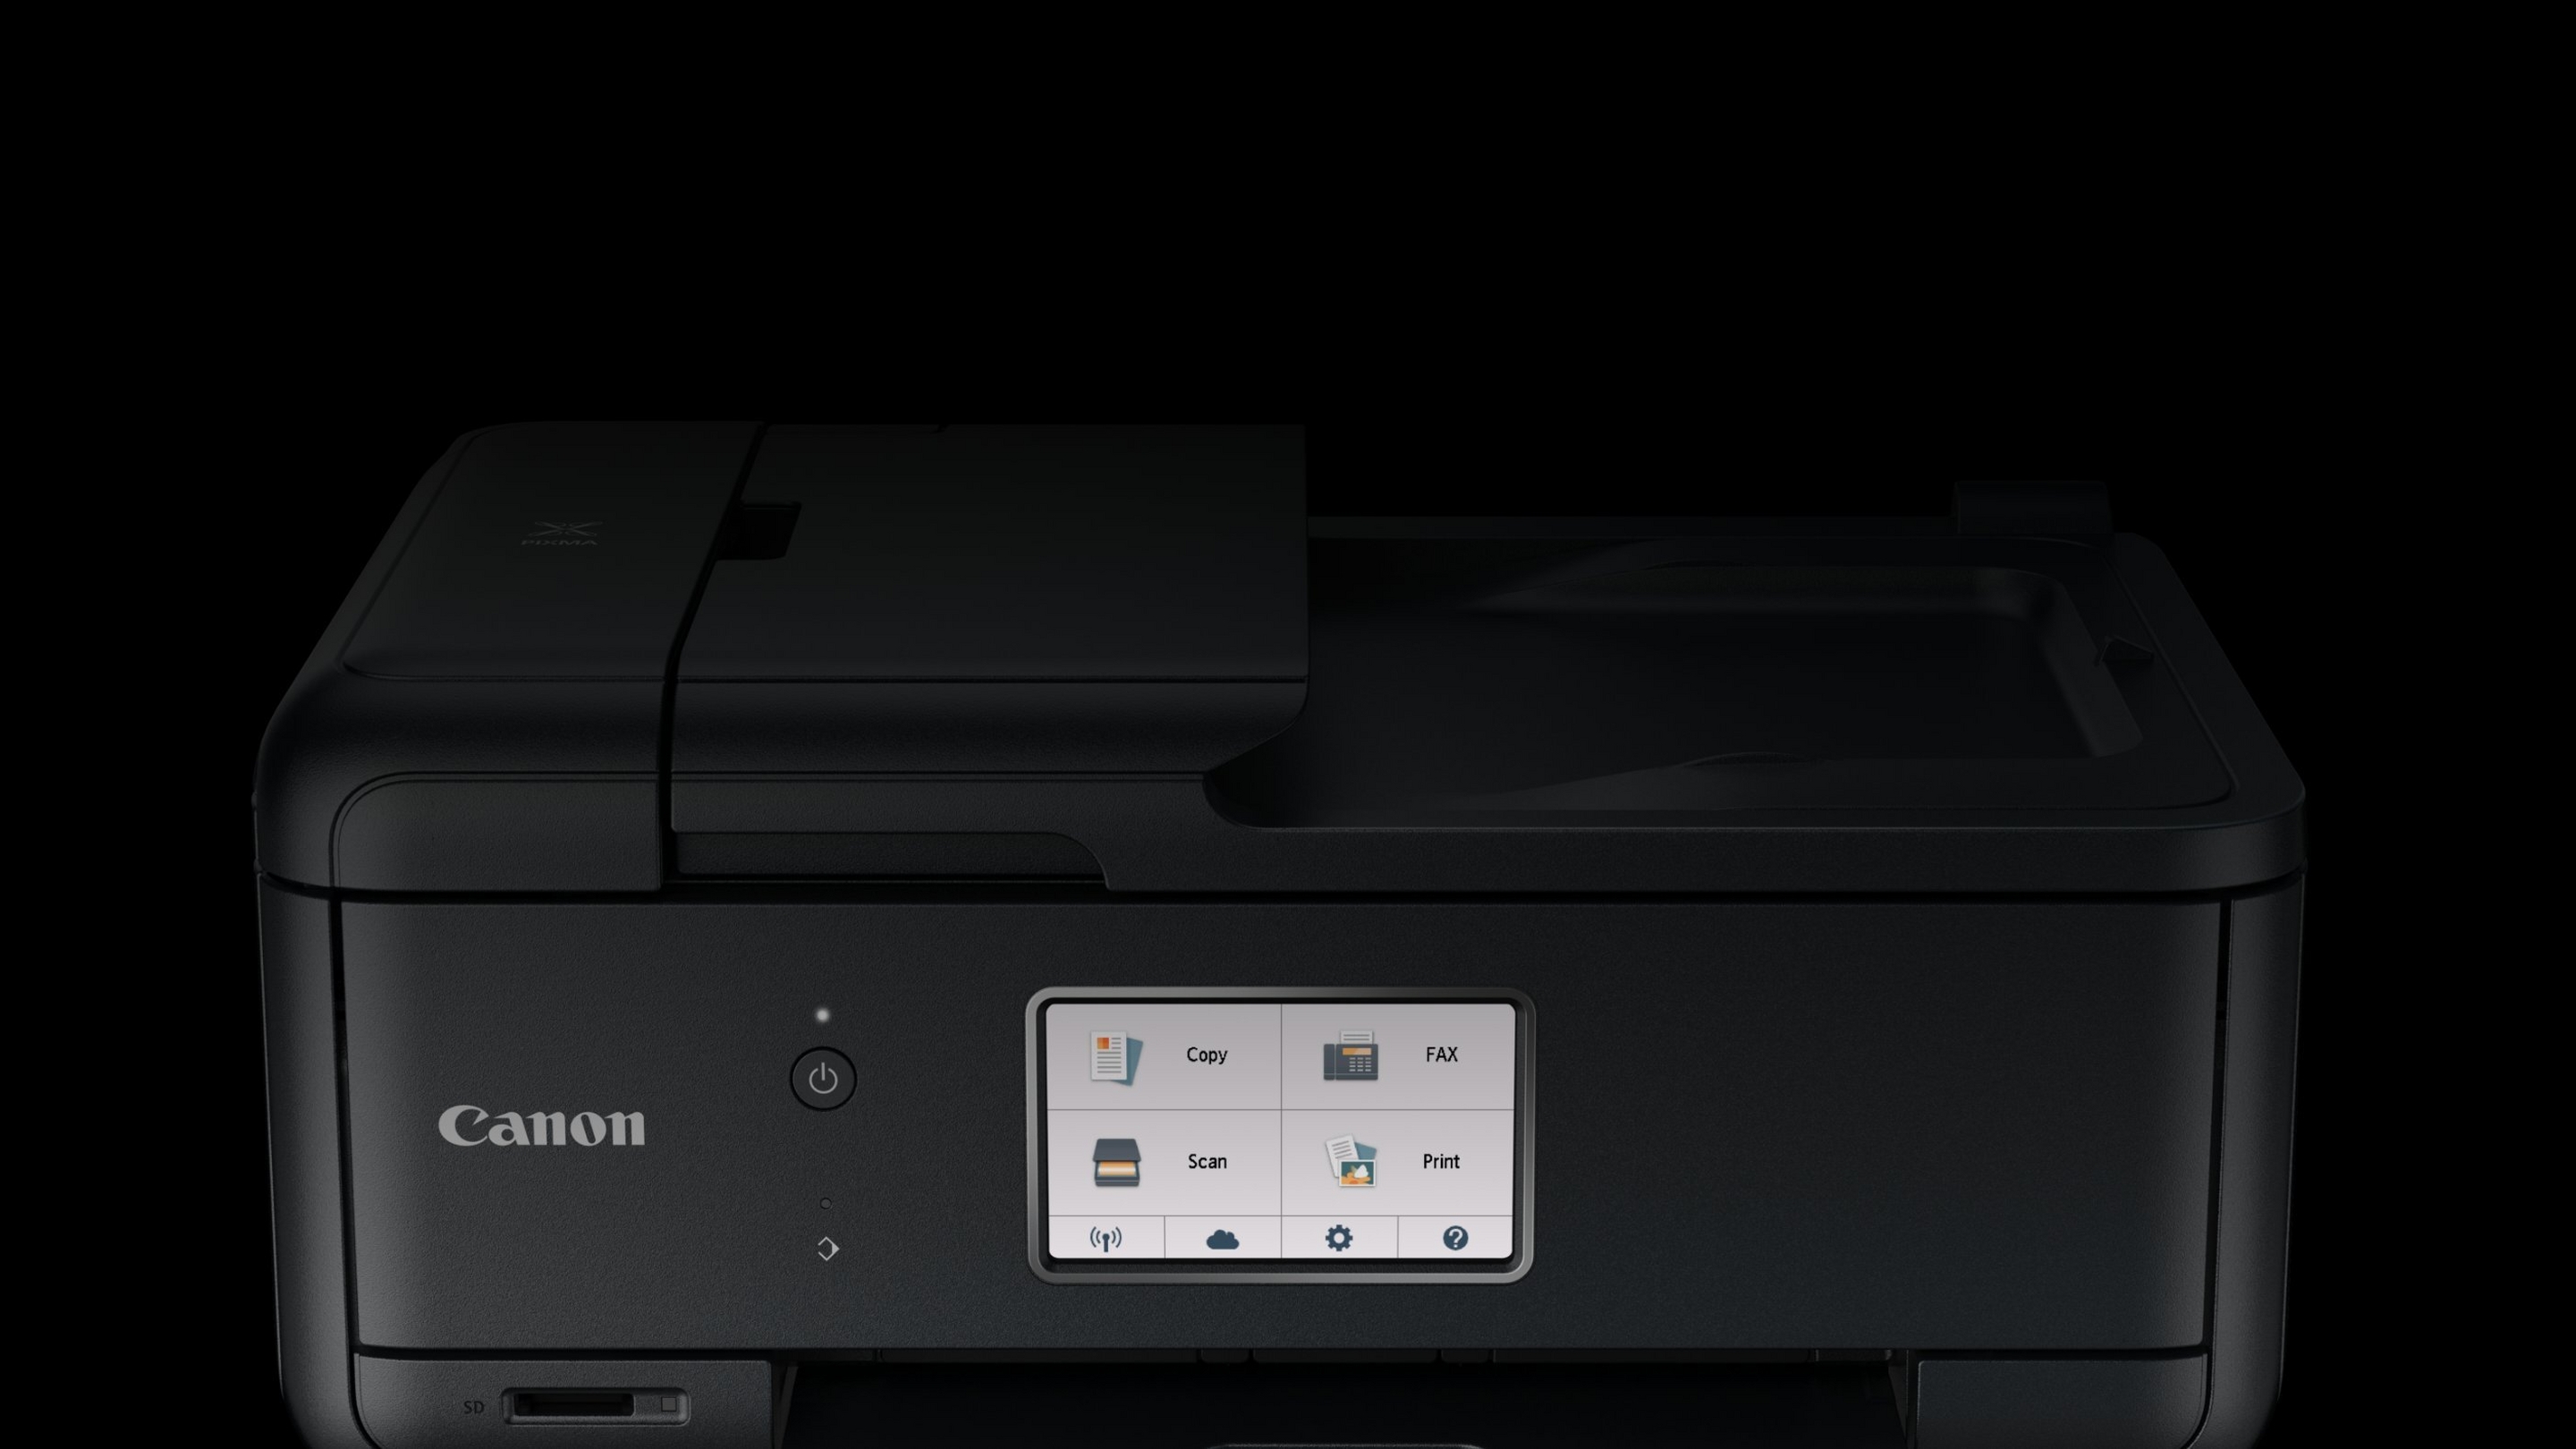 Do you need help finding a printer?